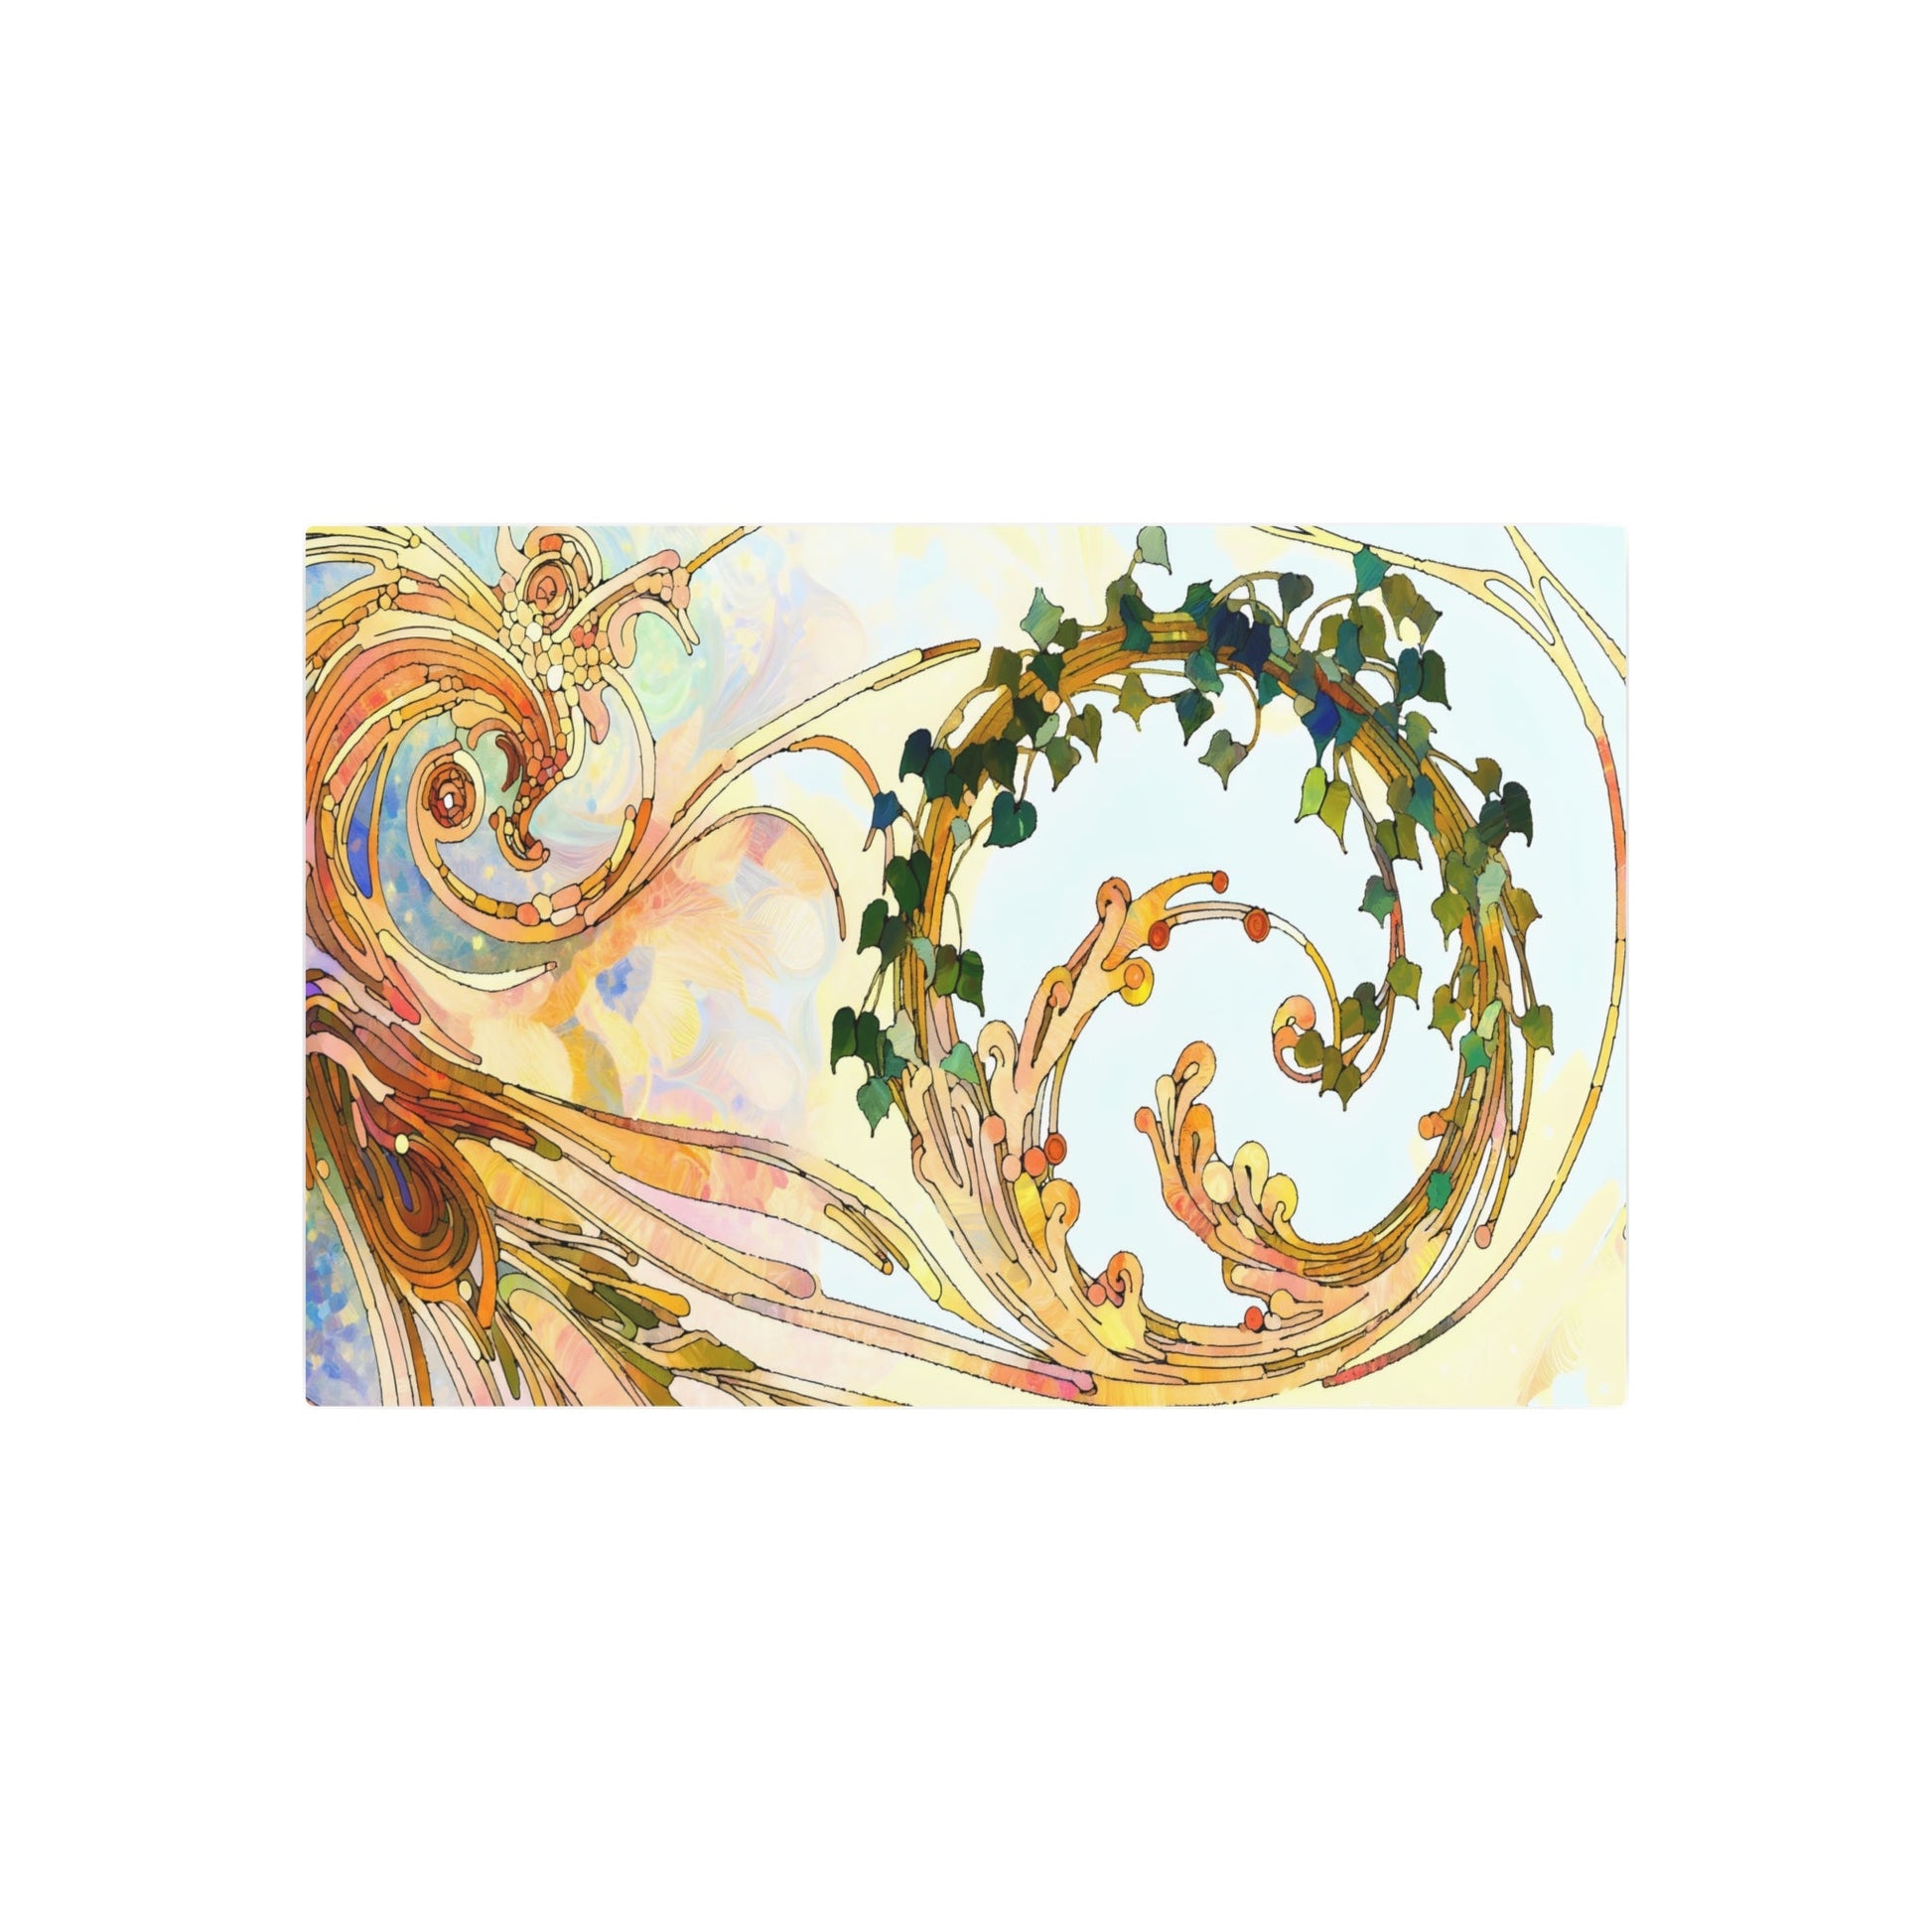 Metal Poster Art | "Art Nouveau Inspired Western Art Style Image with Intricate Flowing Designs and Nature-Inspired Motifs" - Metal Poster Art 36″ x 24″ (Horizontal) 0.12''